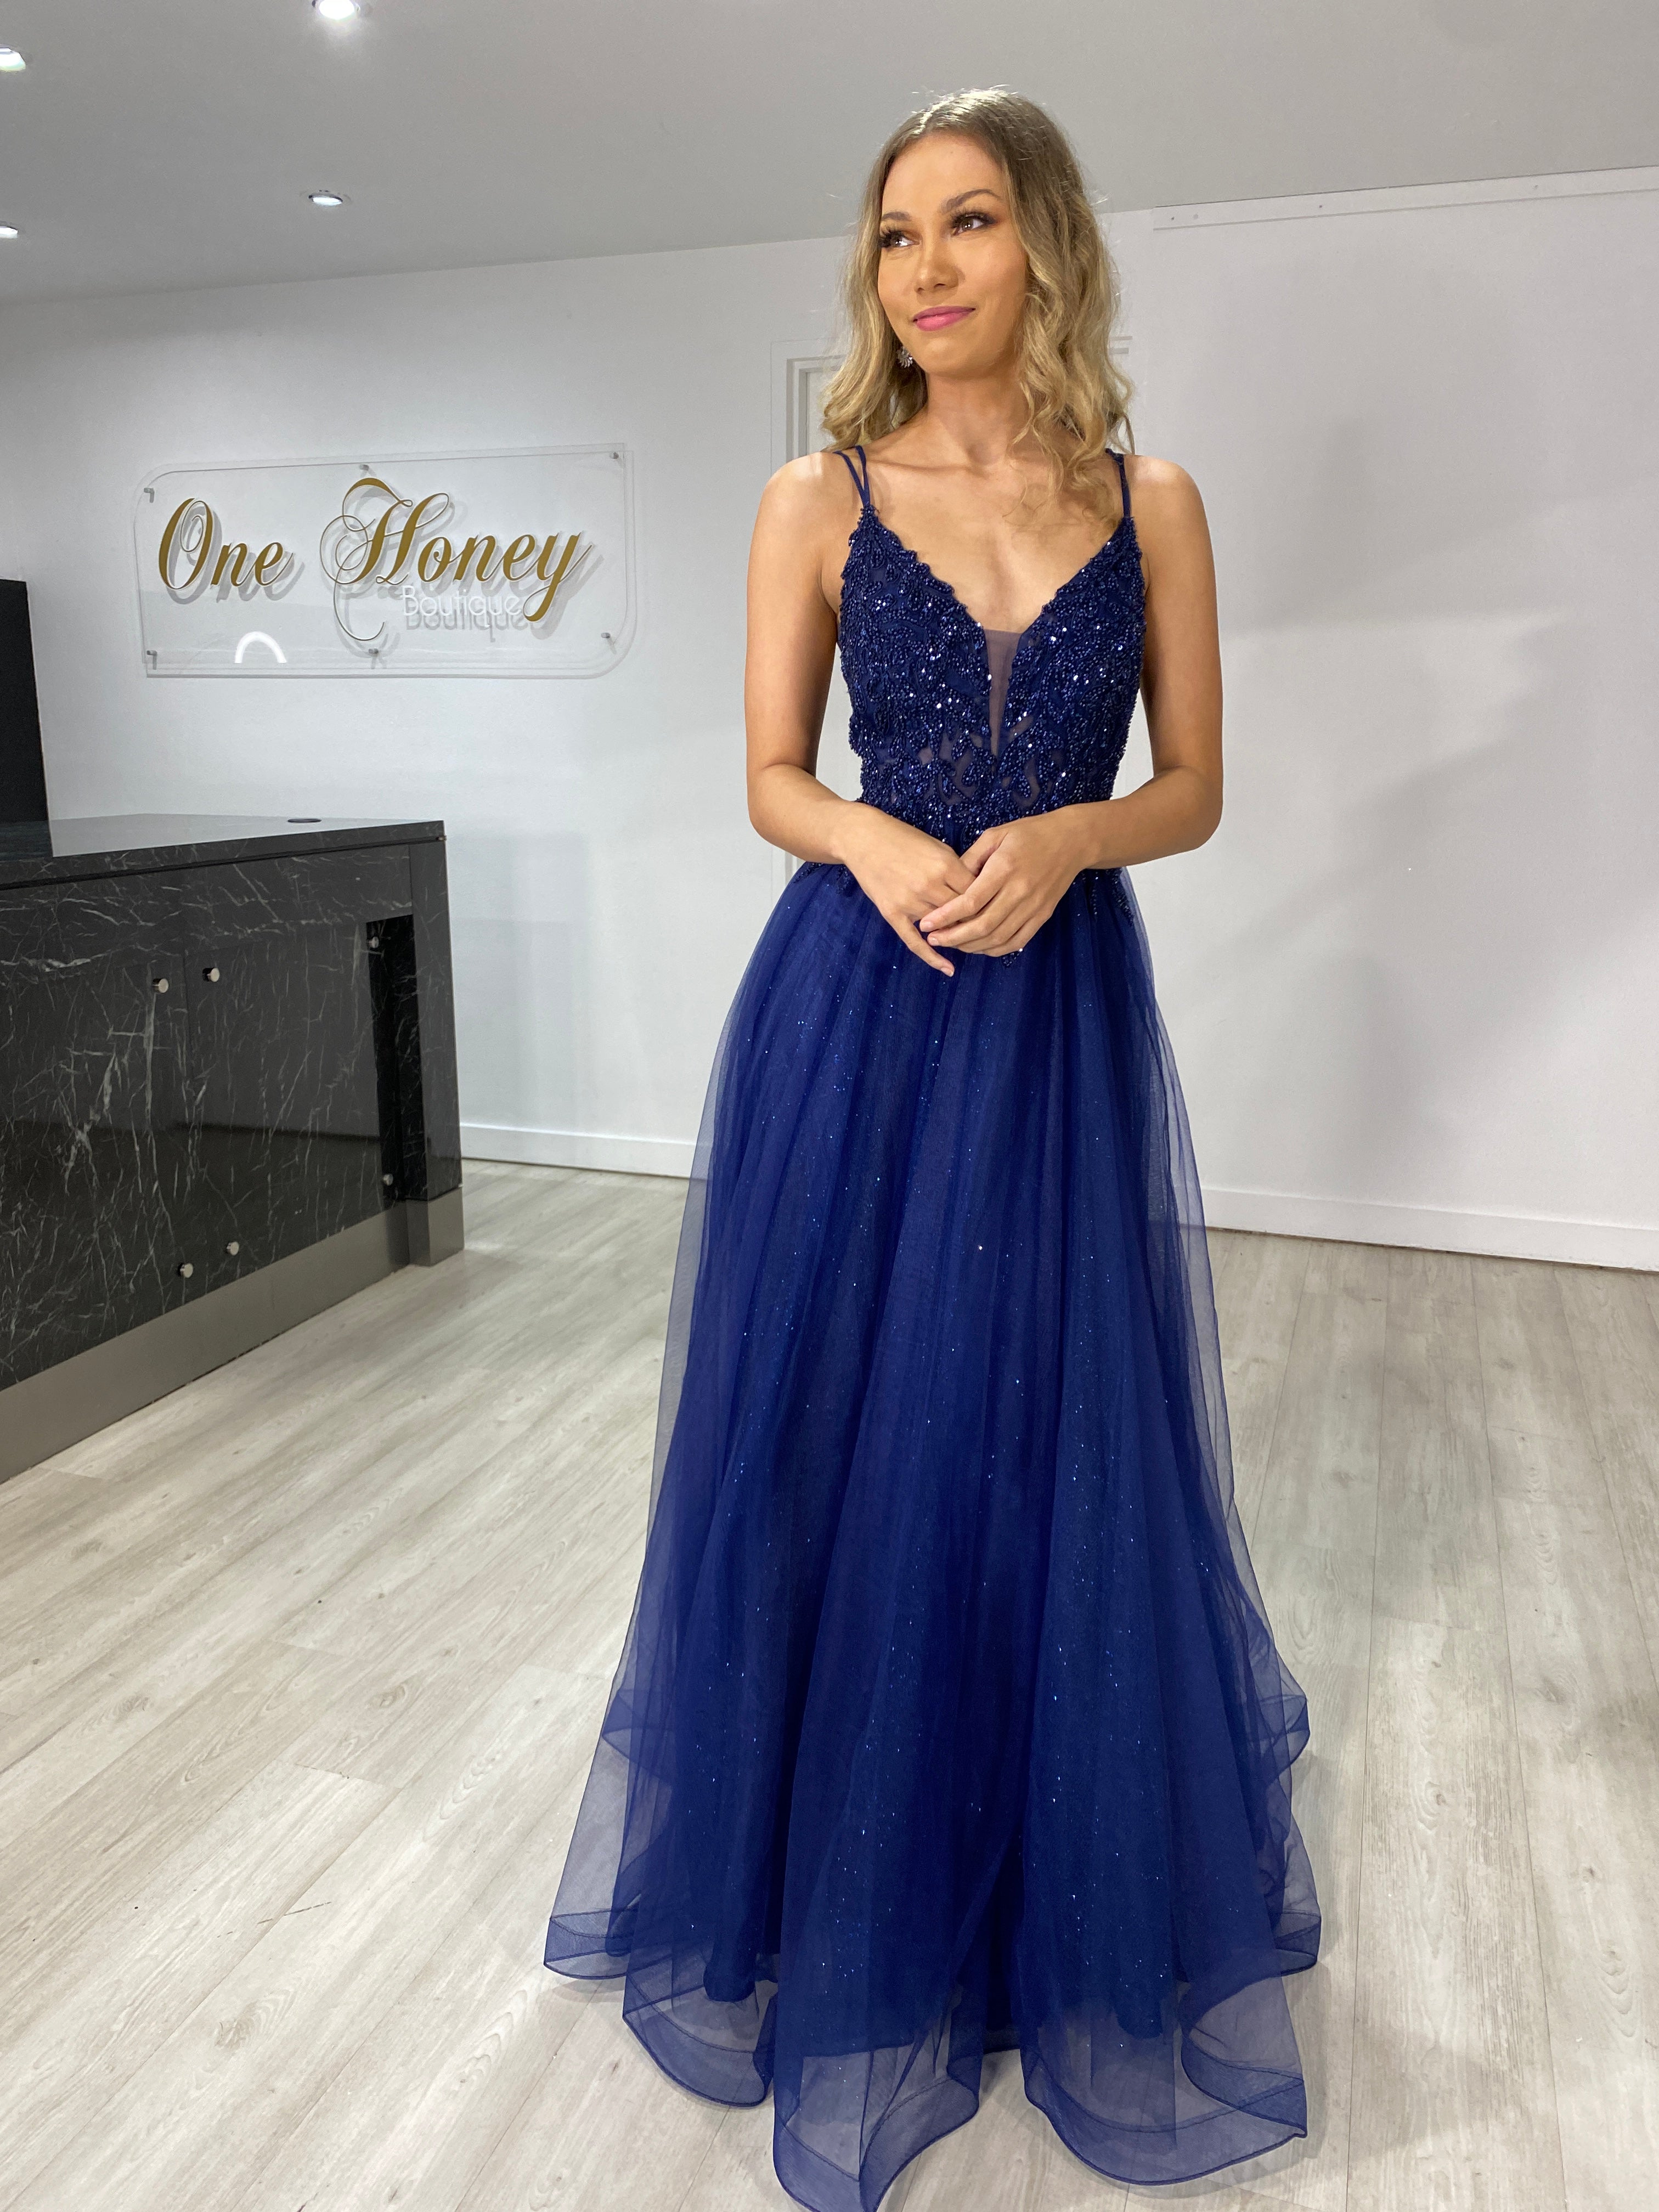 Honey Couture REAGAN Blue Beaded Crystal Tulle Ball Gown Formal Dress